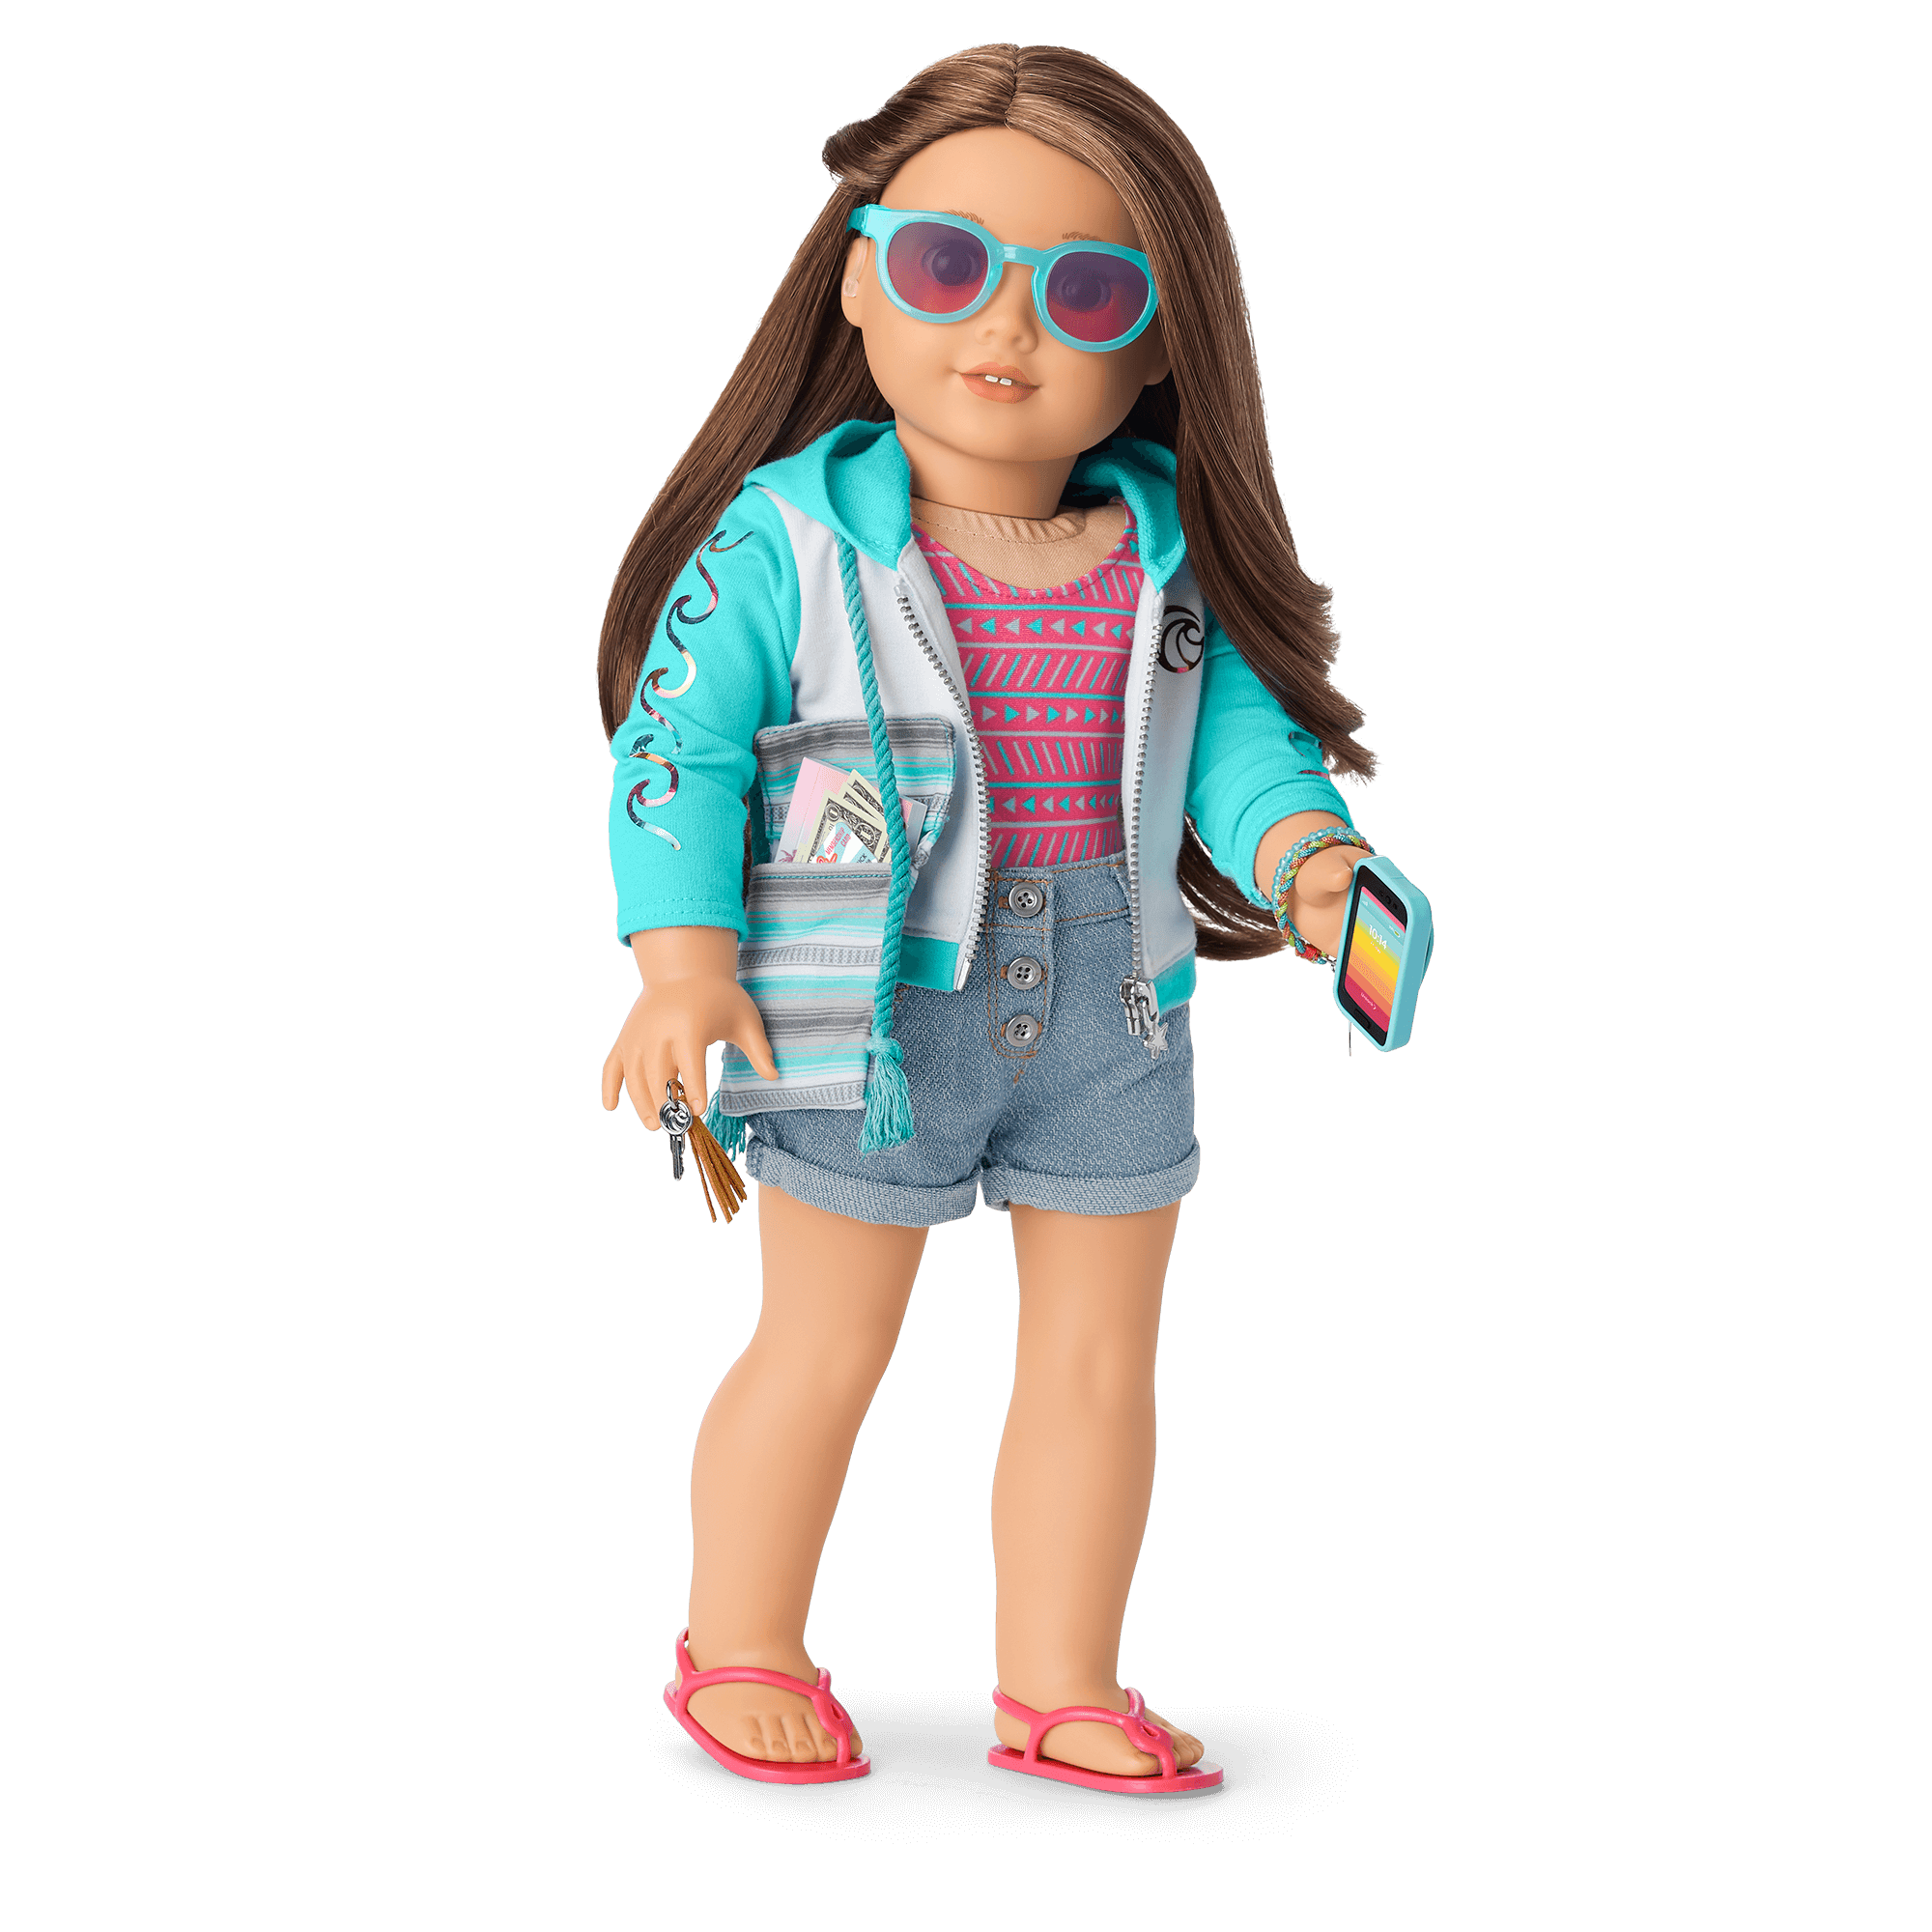 30 Facts You Didn't Know About American Girl Dolls | lupon.gov.ph